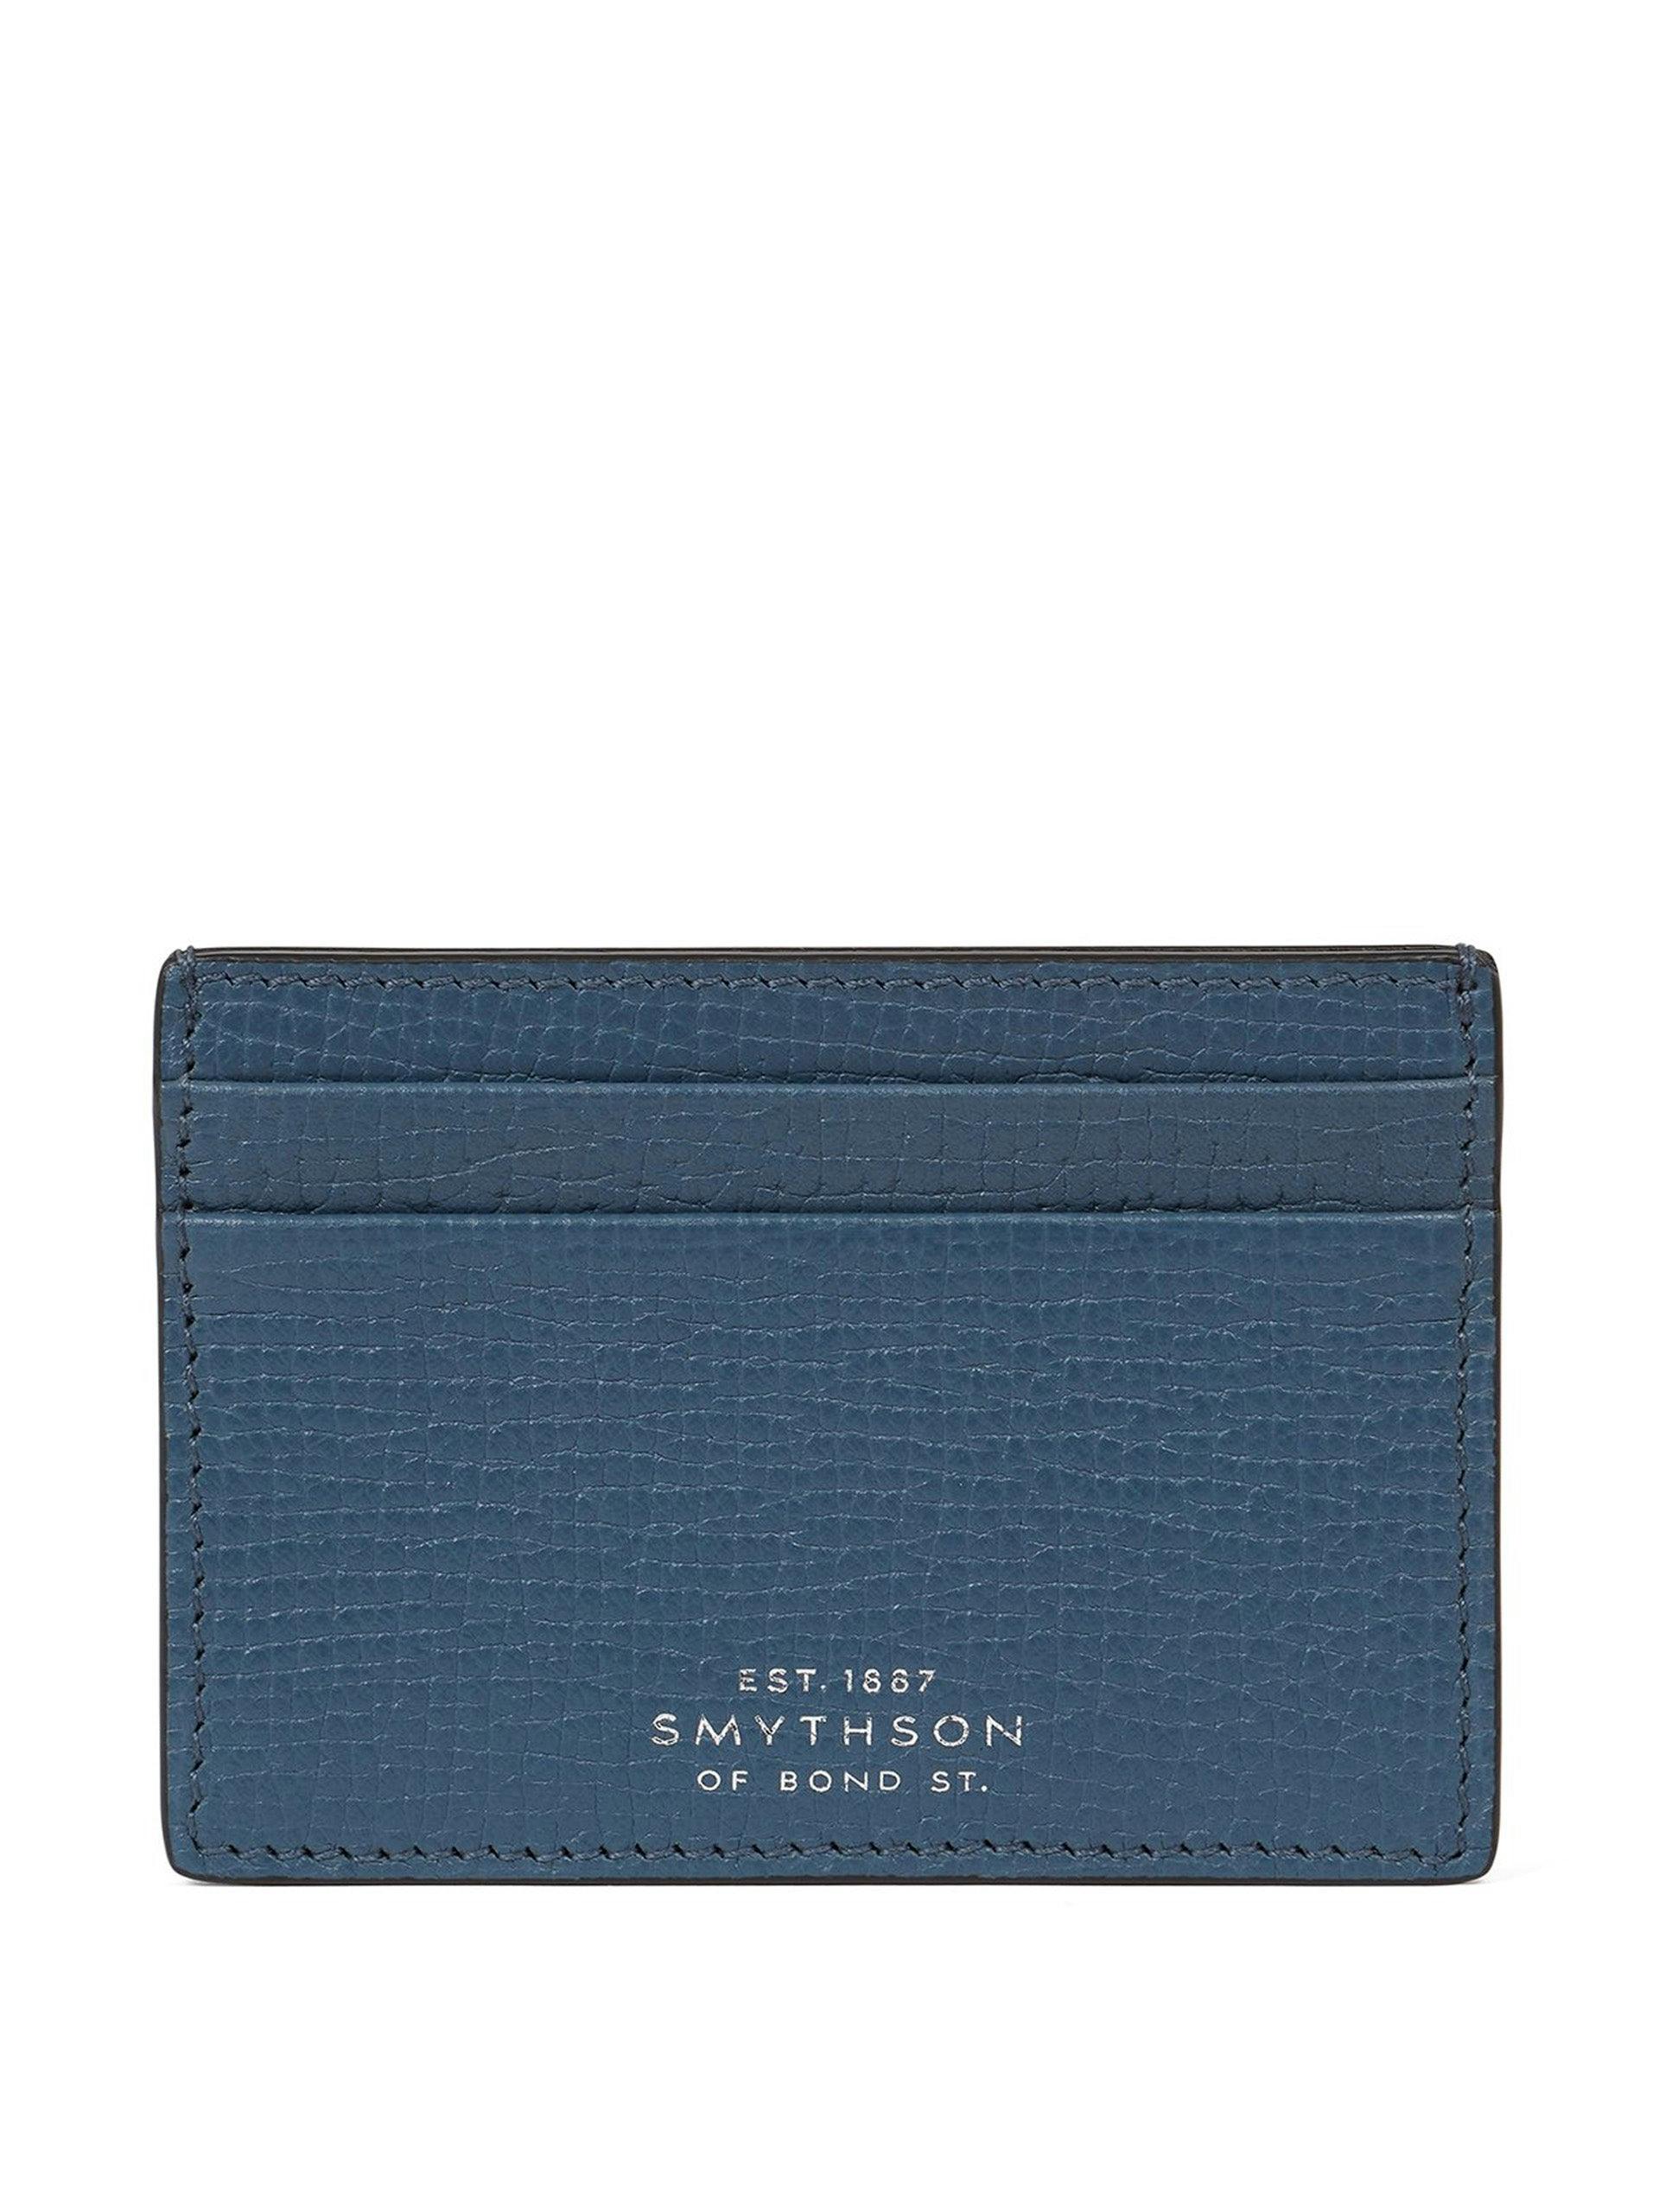 Leather card holder in Admiral Blue